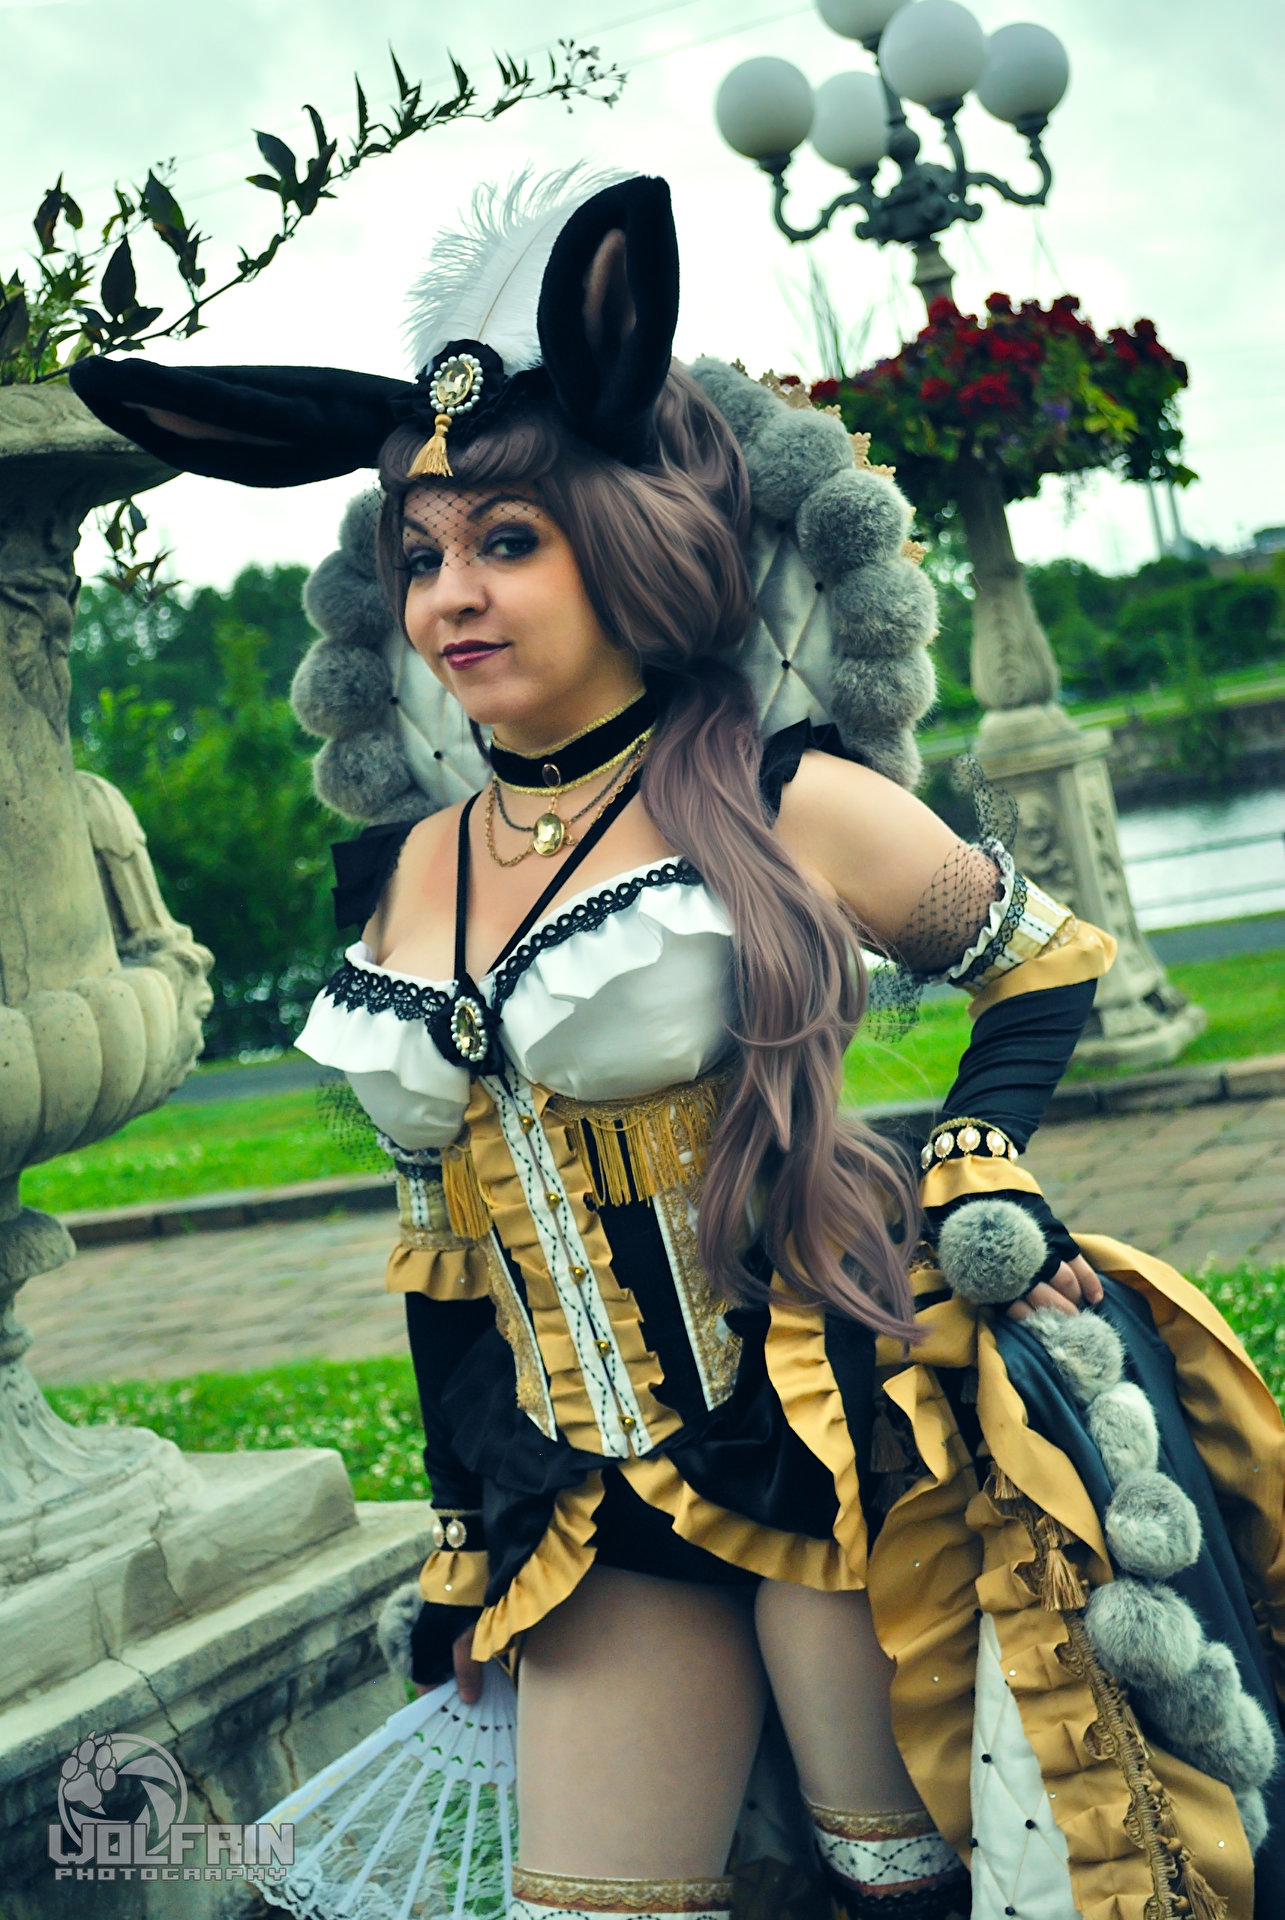 Cospix.net photo featuring Wolfrin-Photography ¦ Cosplayer